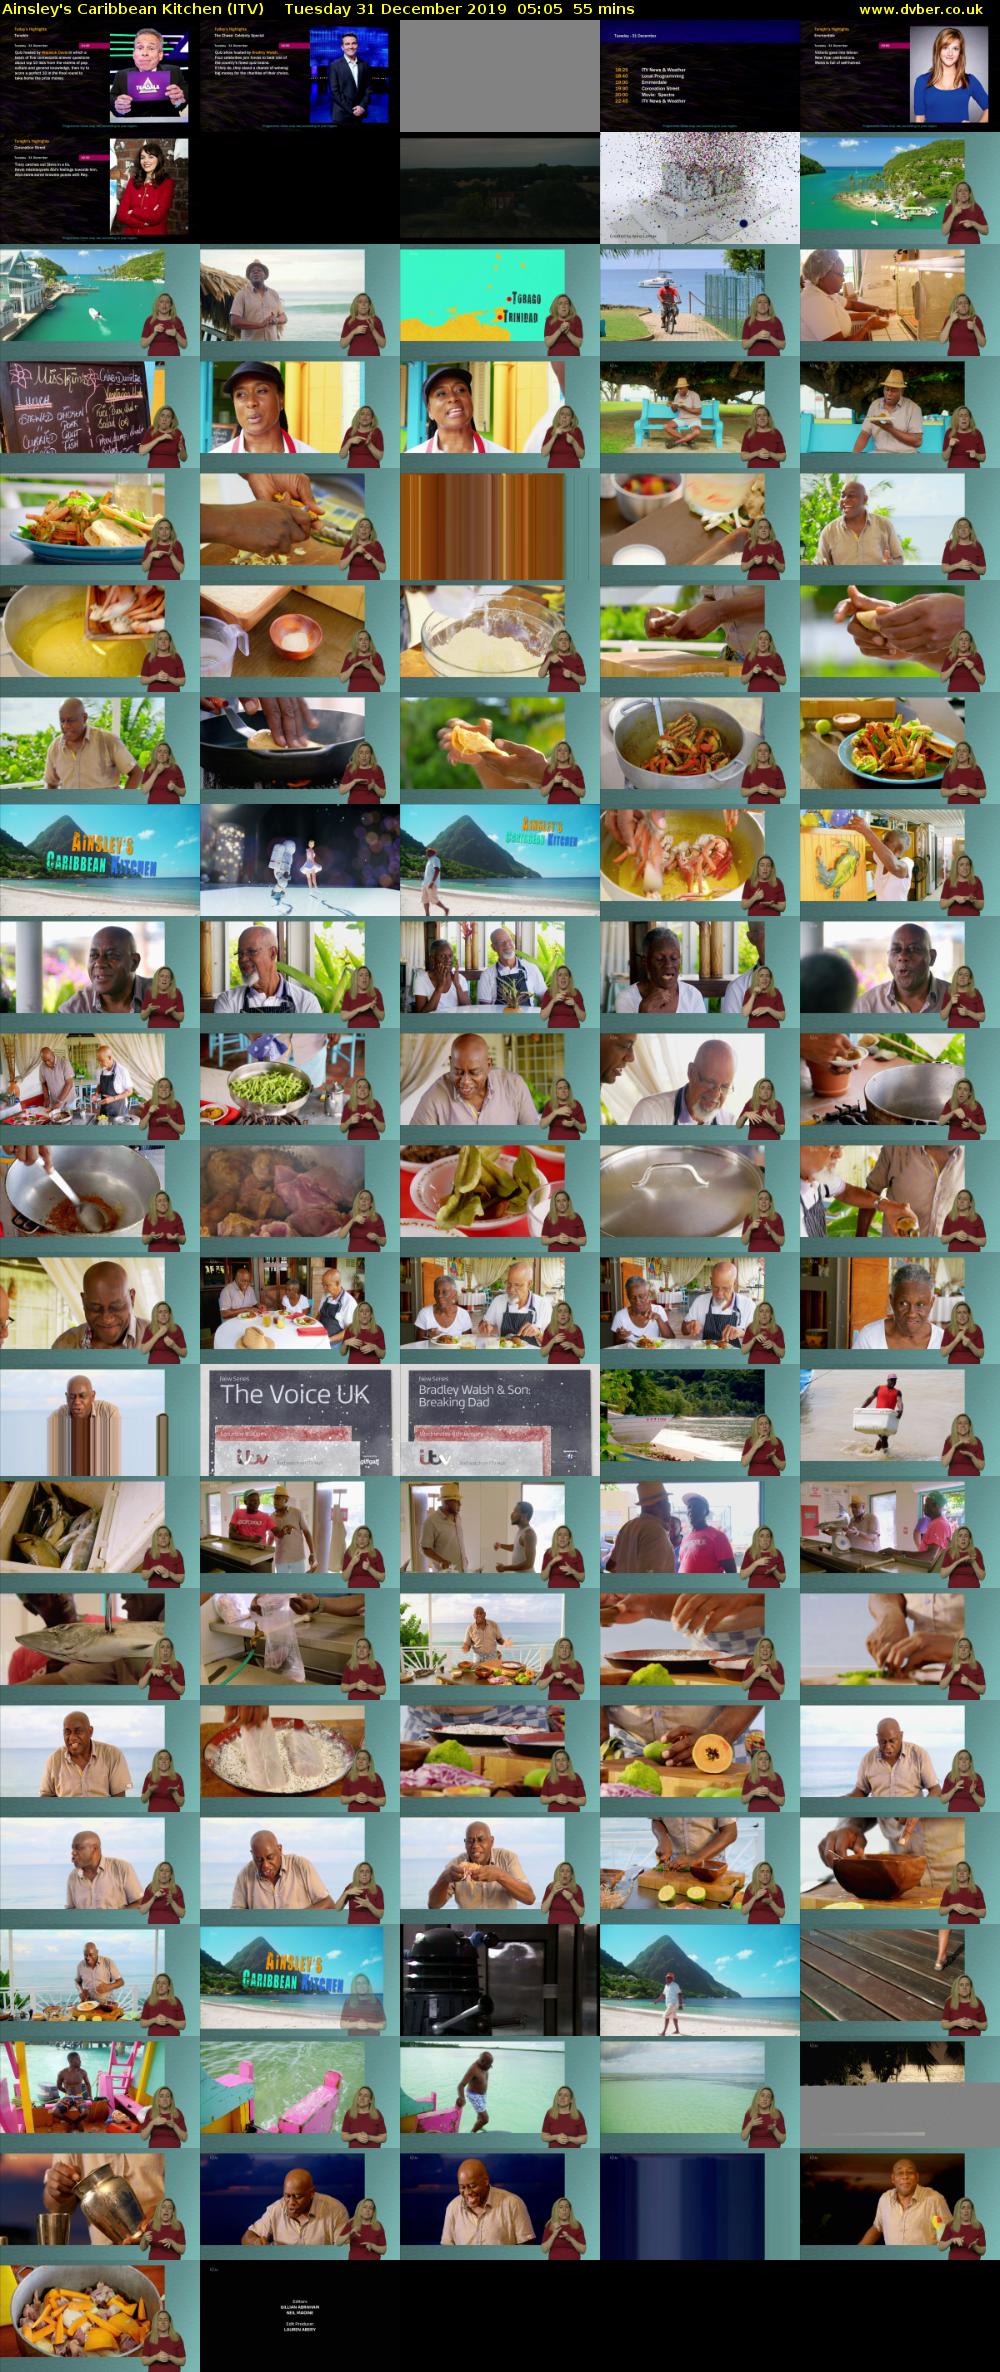 Ainsley's Caribbean Kitchen (ITV) Tuesday 31 December 2019 05:05 - 06:00